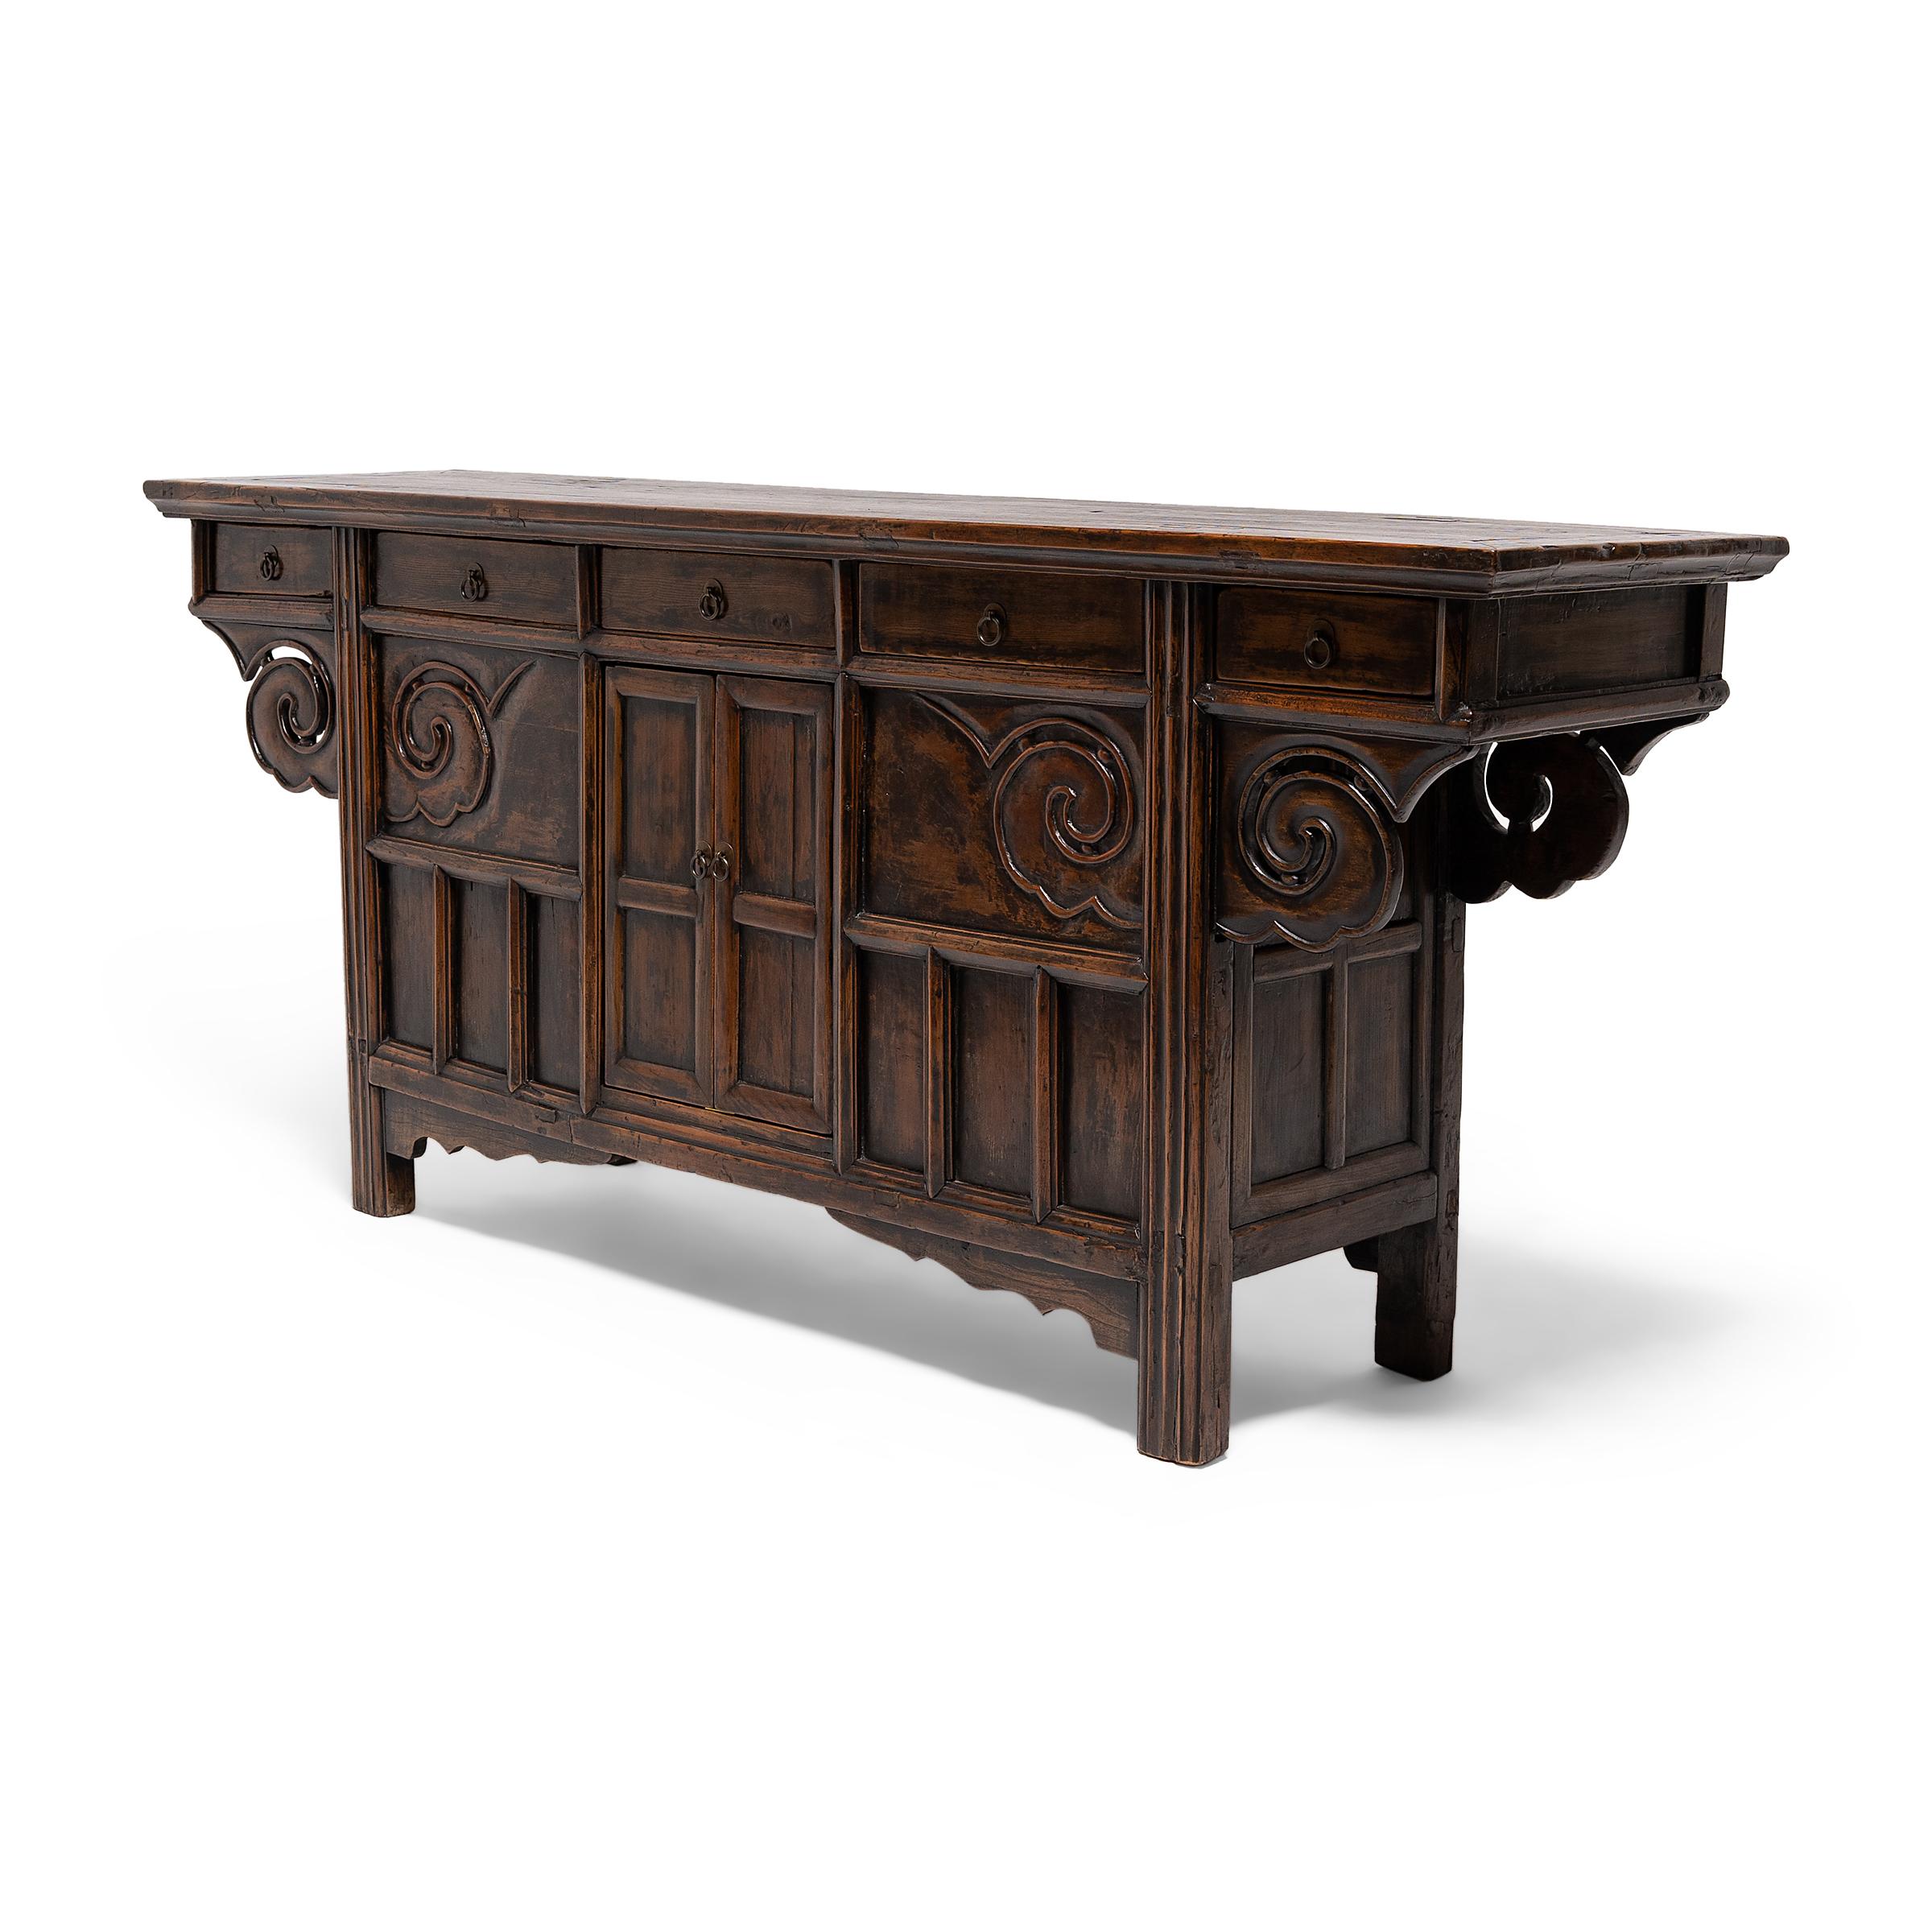 This provincial altar coffer from the mid-19th century is beautifully designed with inset panels, bold carvings, and a fantastic, richly aged patina. Given its large scale and expansive table top, the coffer was likely used as a family altar for